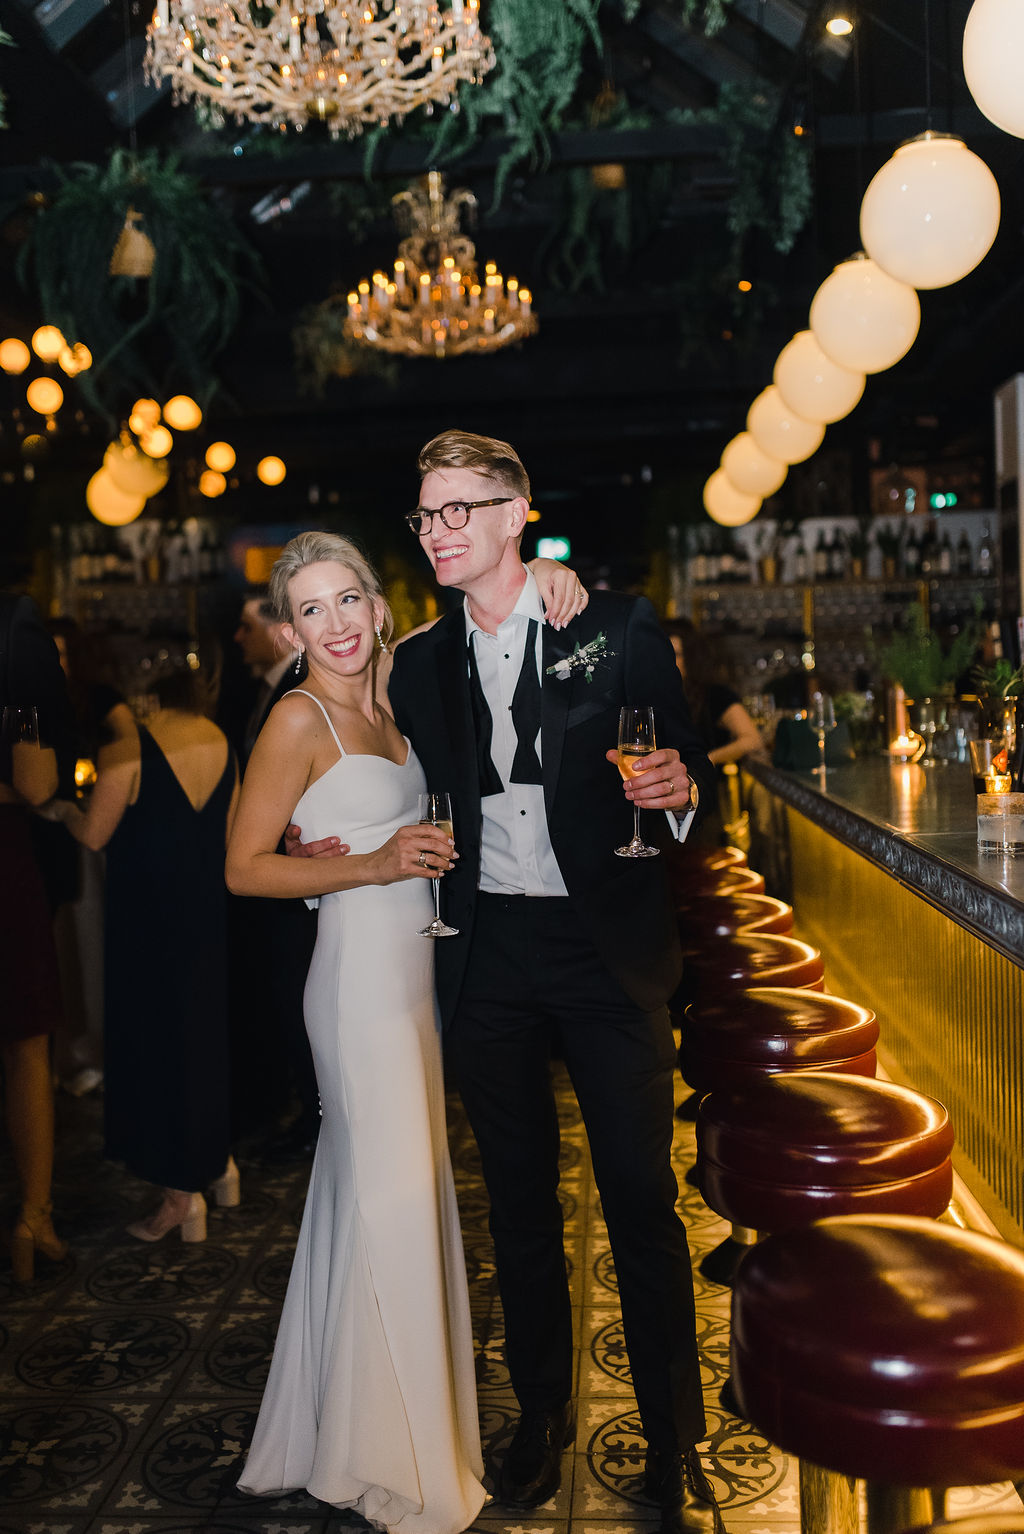 Portrait of bride and groom in Royale venue at their wedding reception, flash photo inspiration, winter wedding inspiration. 